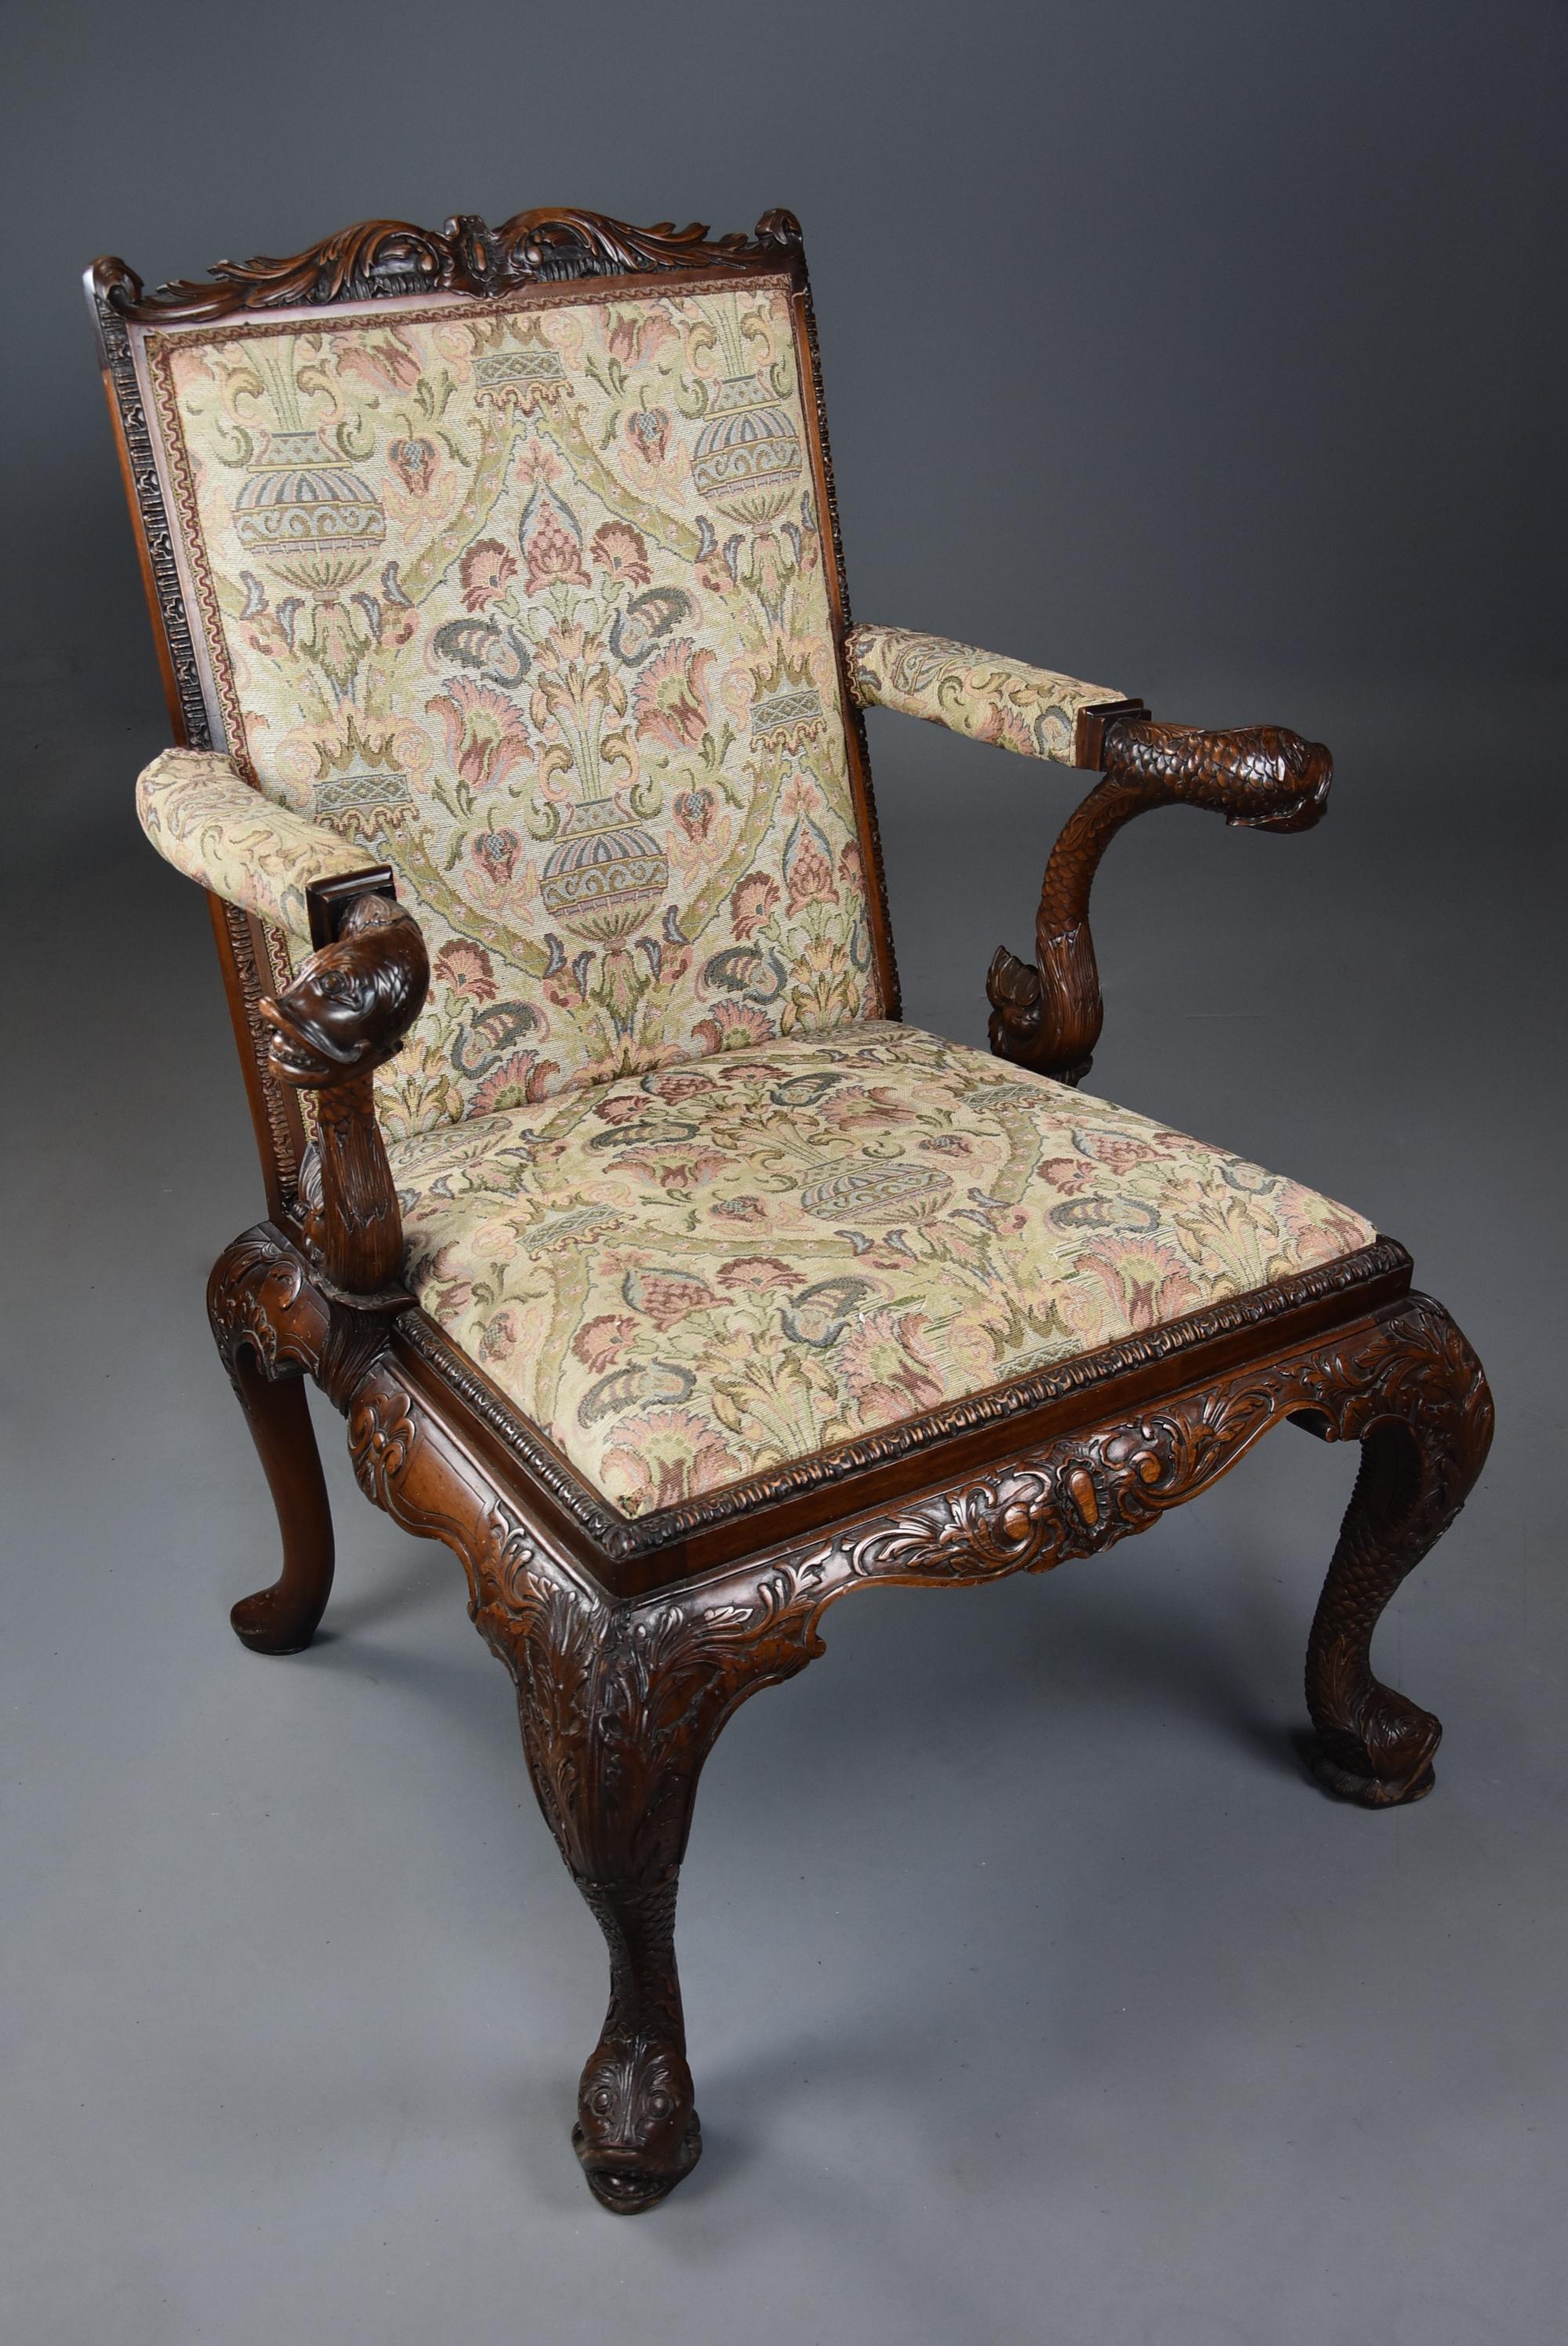 A superb quality early 20th century George II style mahogany Gainsborough open armchair or library chair of good proportions based on an original design made in the 18th century.

The chair consists of a shaped and carved top rail with a carved